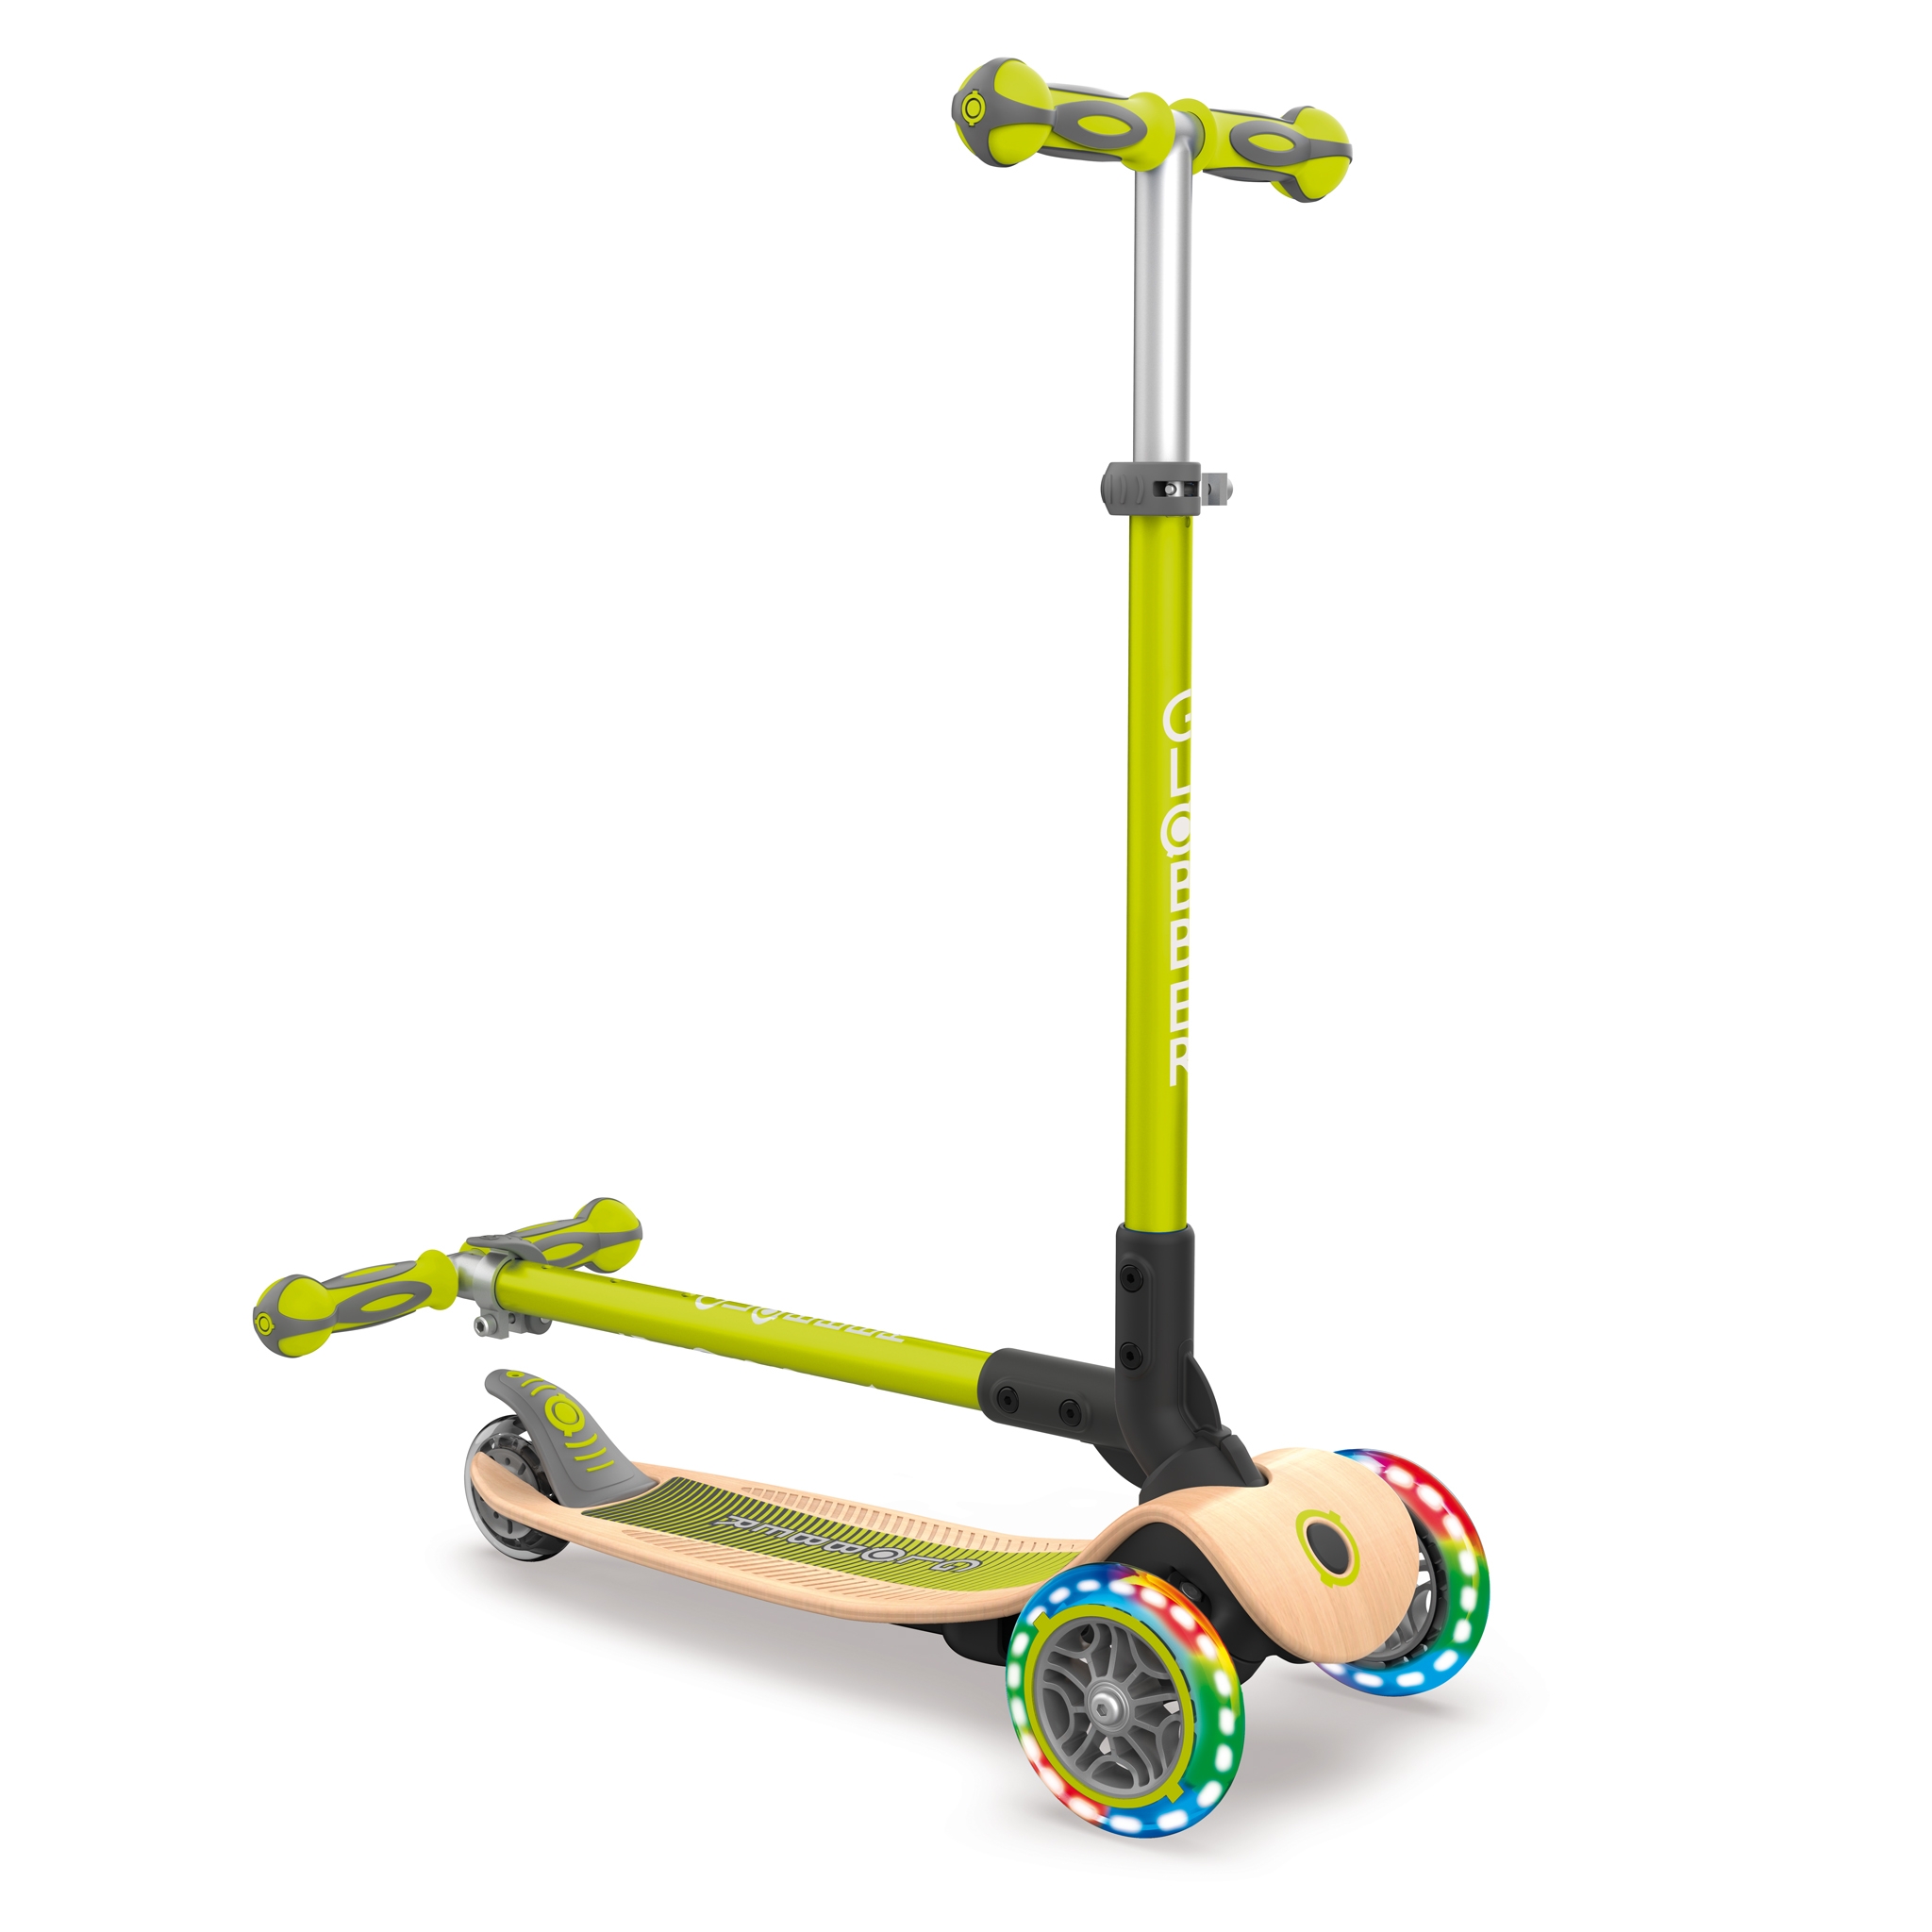 PRIMO-FOLDABLE-WOOD-LIGHTS-3-wheel-foldable-scooter-with-7-ply-wooden-scooter-deck-and-battery-free-light-up-wheels_lime-green 2